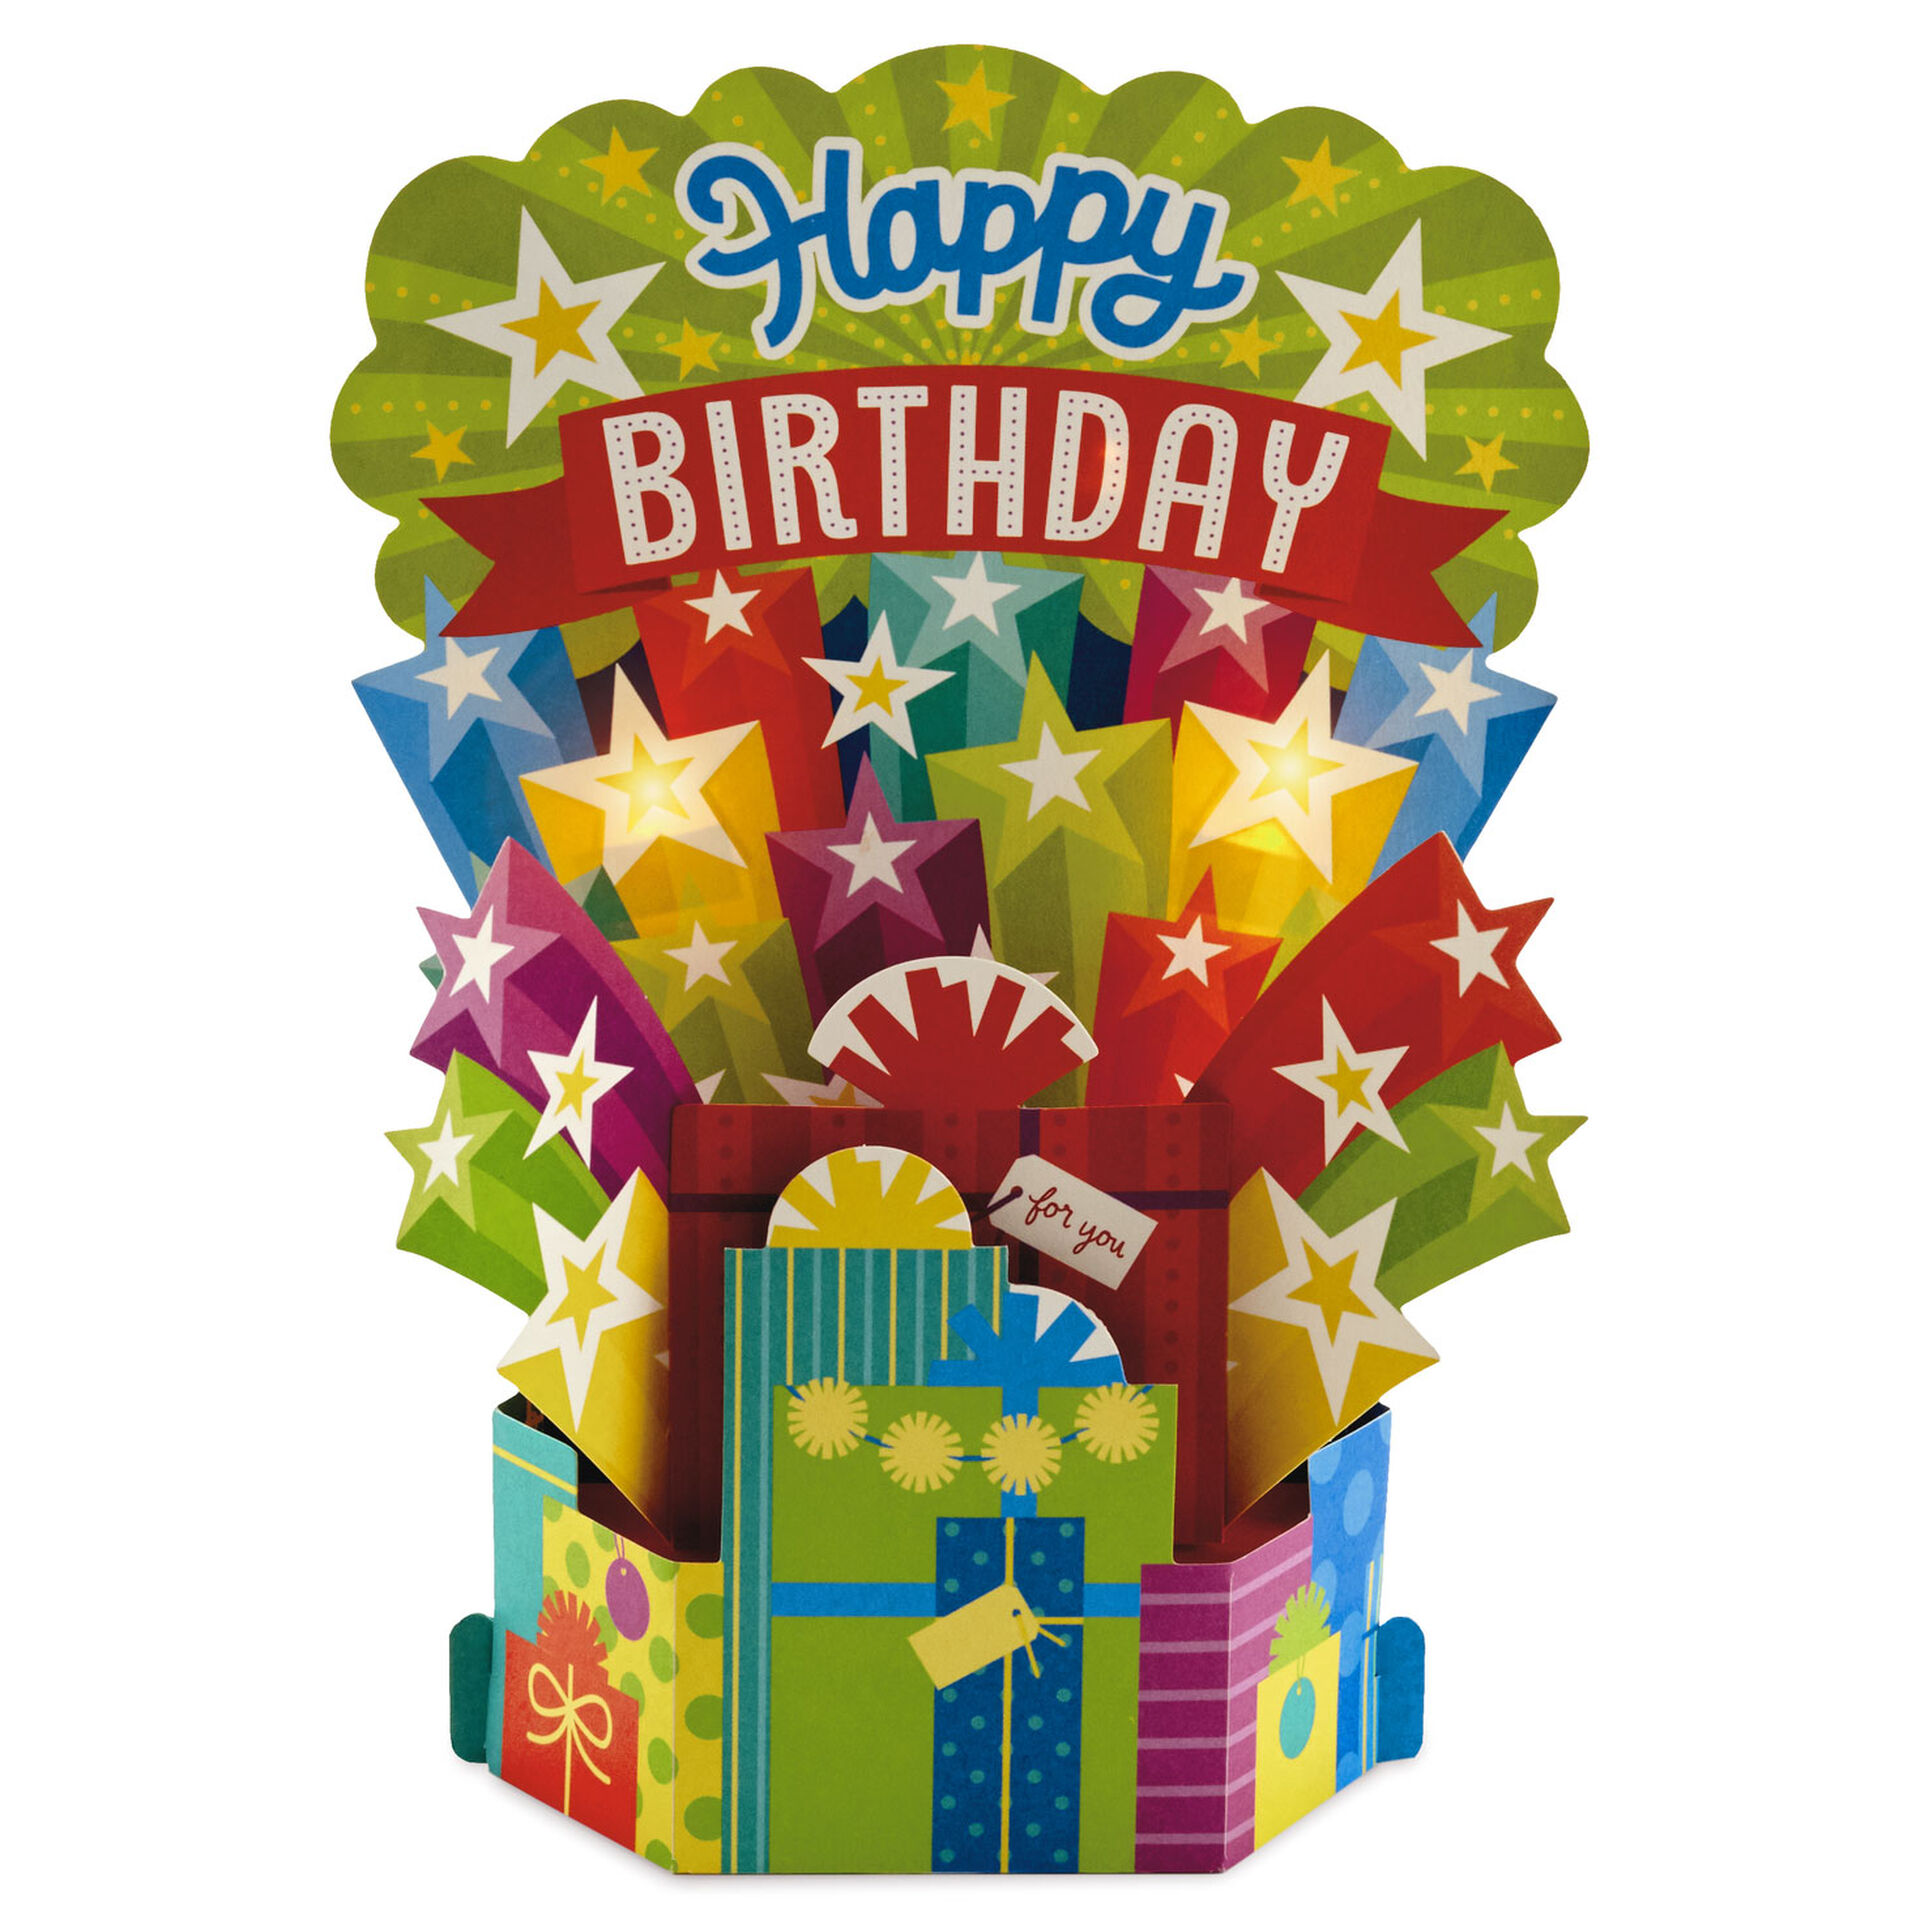 Cake With Candles 3D Pop-Up Musical Birthday Card With Light - Greeting ...